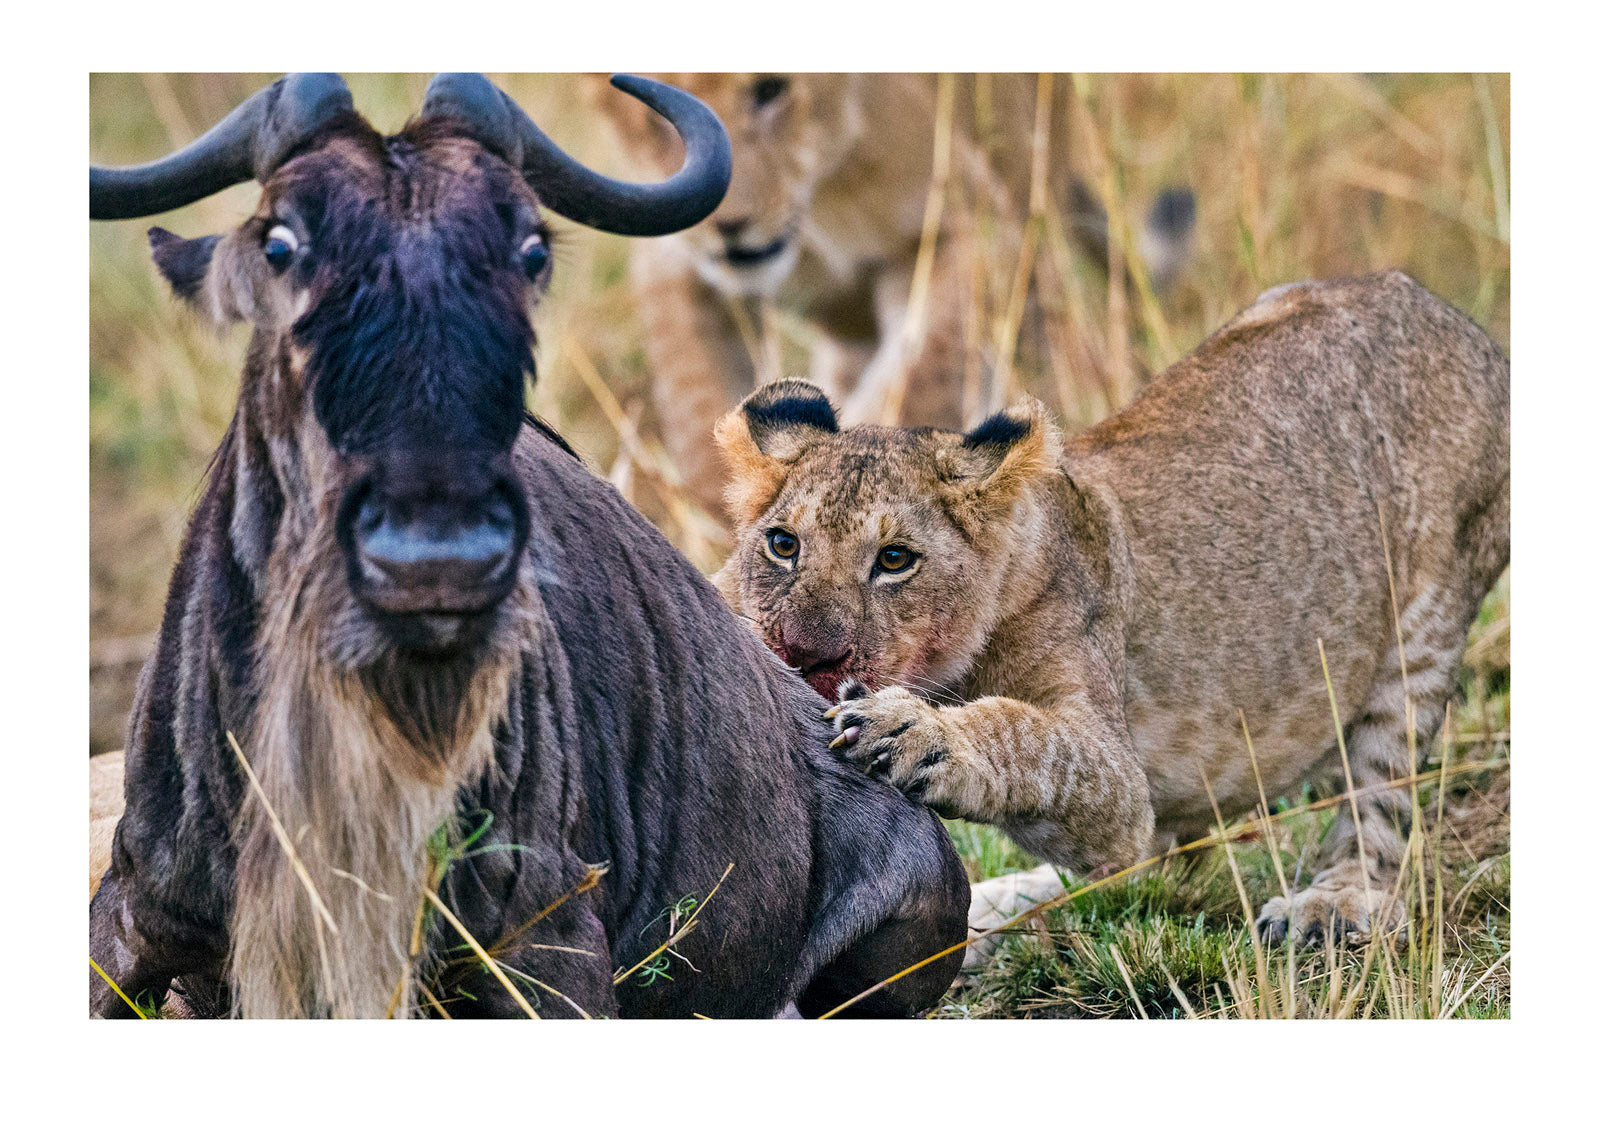 A young lion cub tackles a terrified wildebeest during the Great Migration. Serengeti National Park, Tanzania.